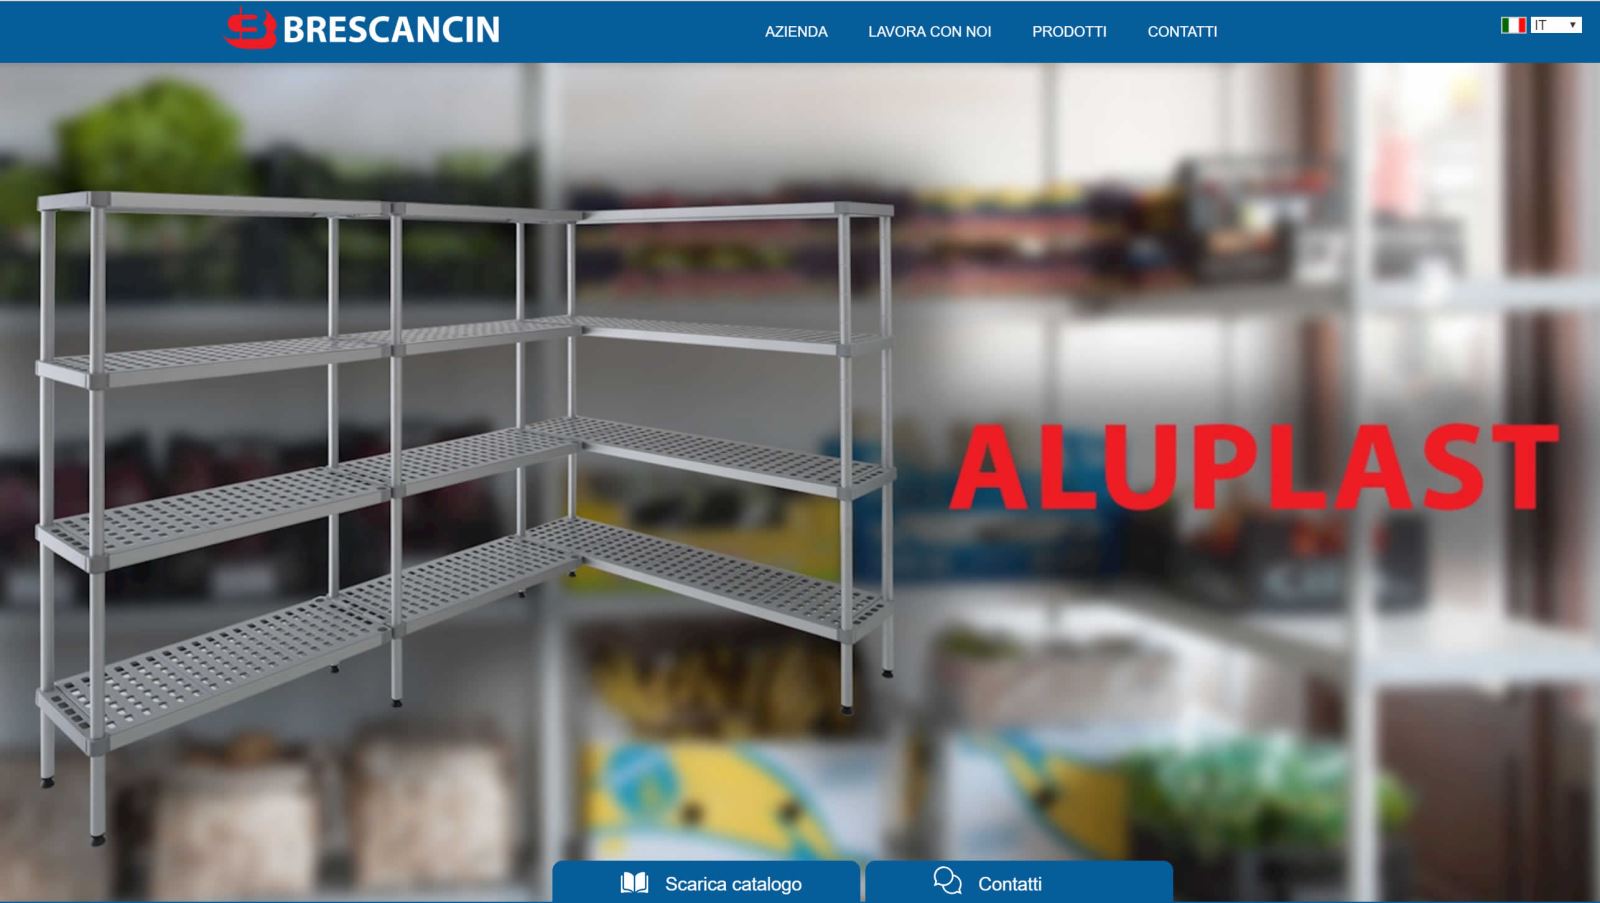 Our site where you can learn about all the Brescancin production: shelves, frames for tables, logs and sinks, leveling feet, table legs